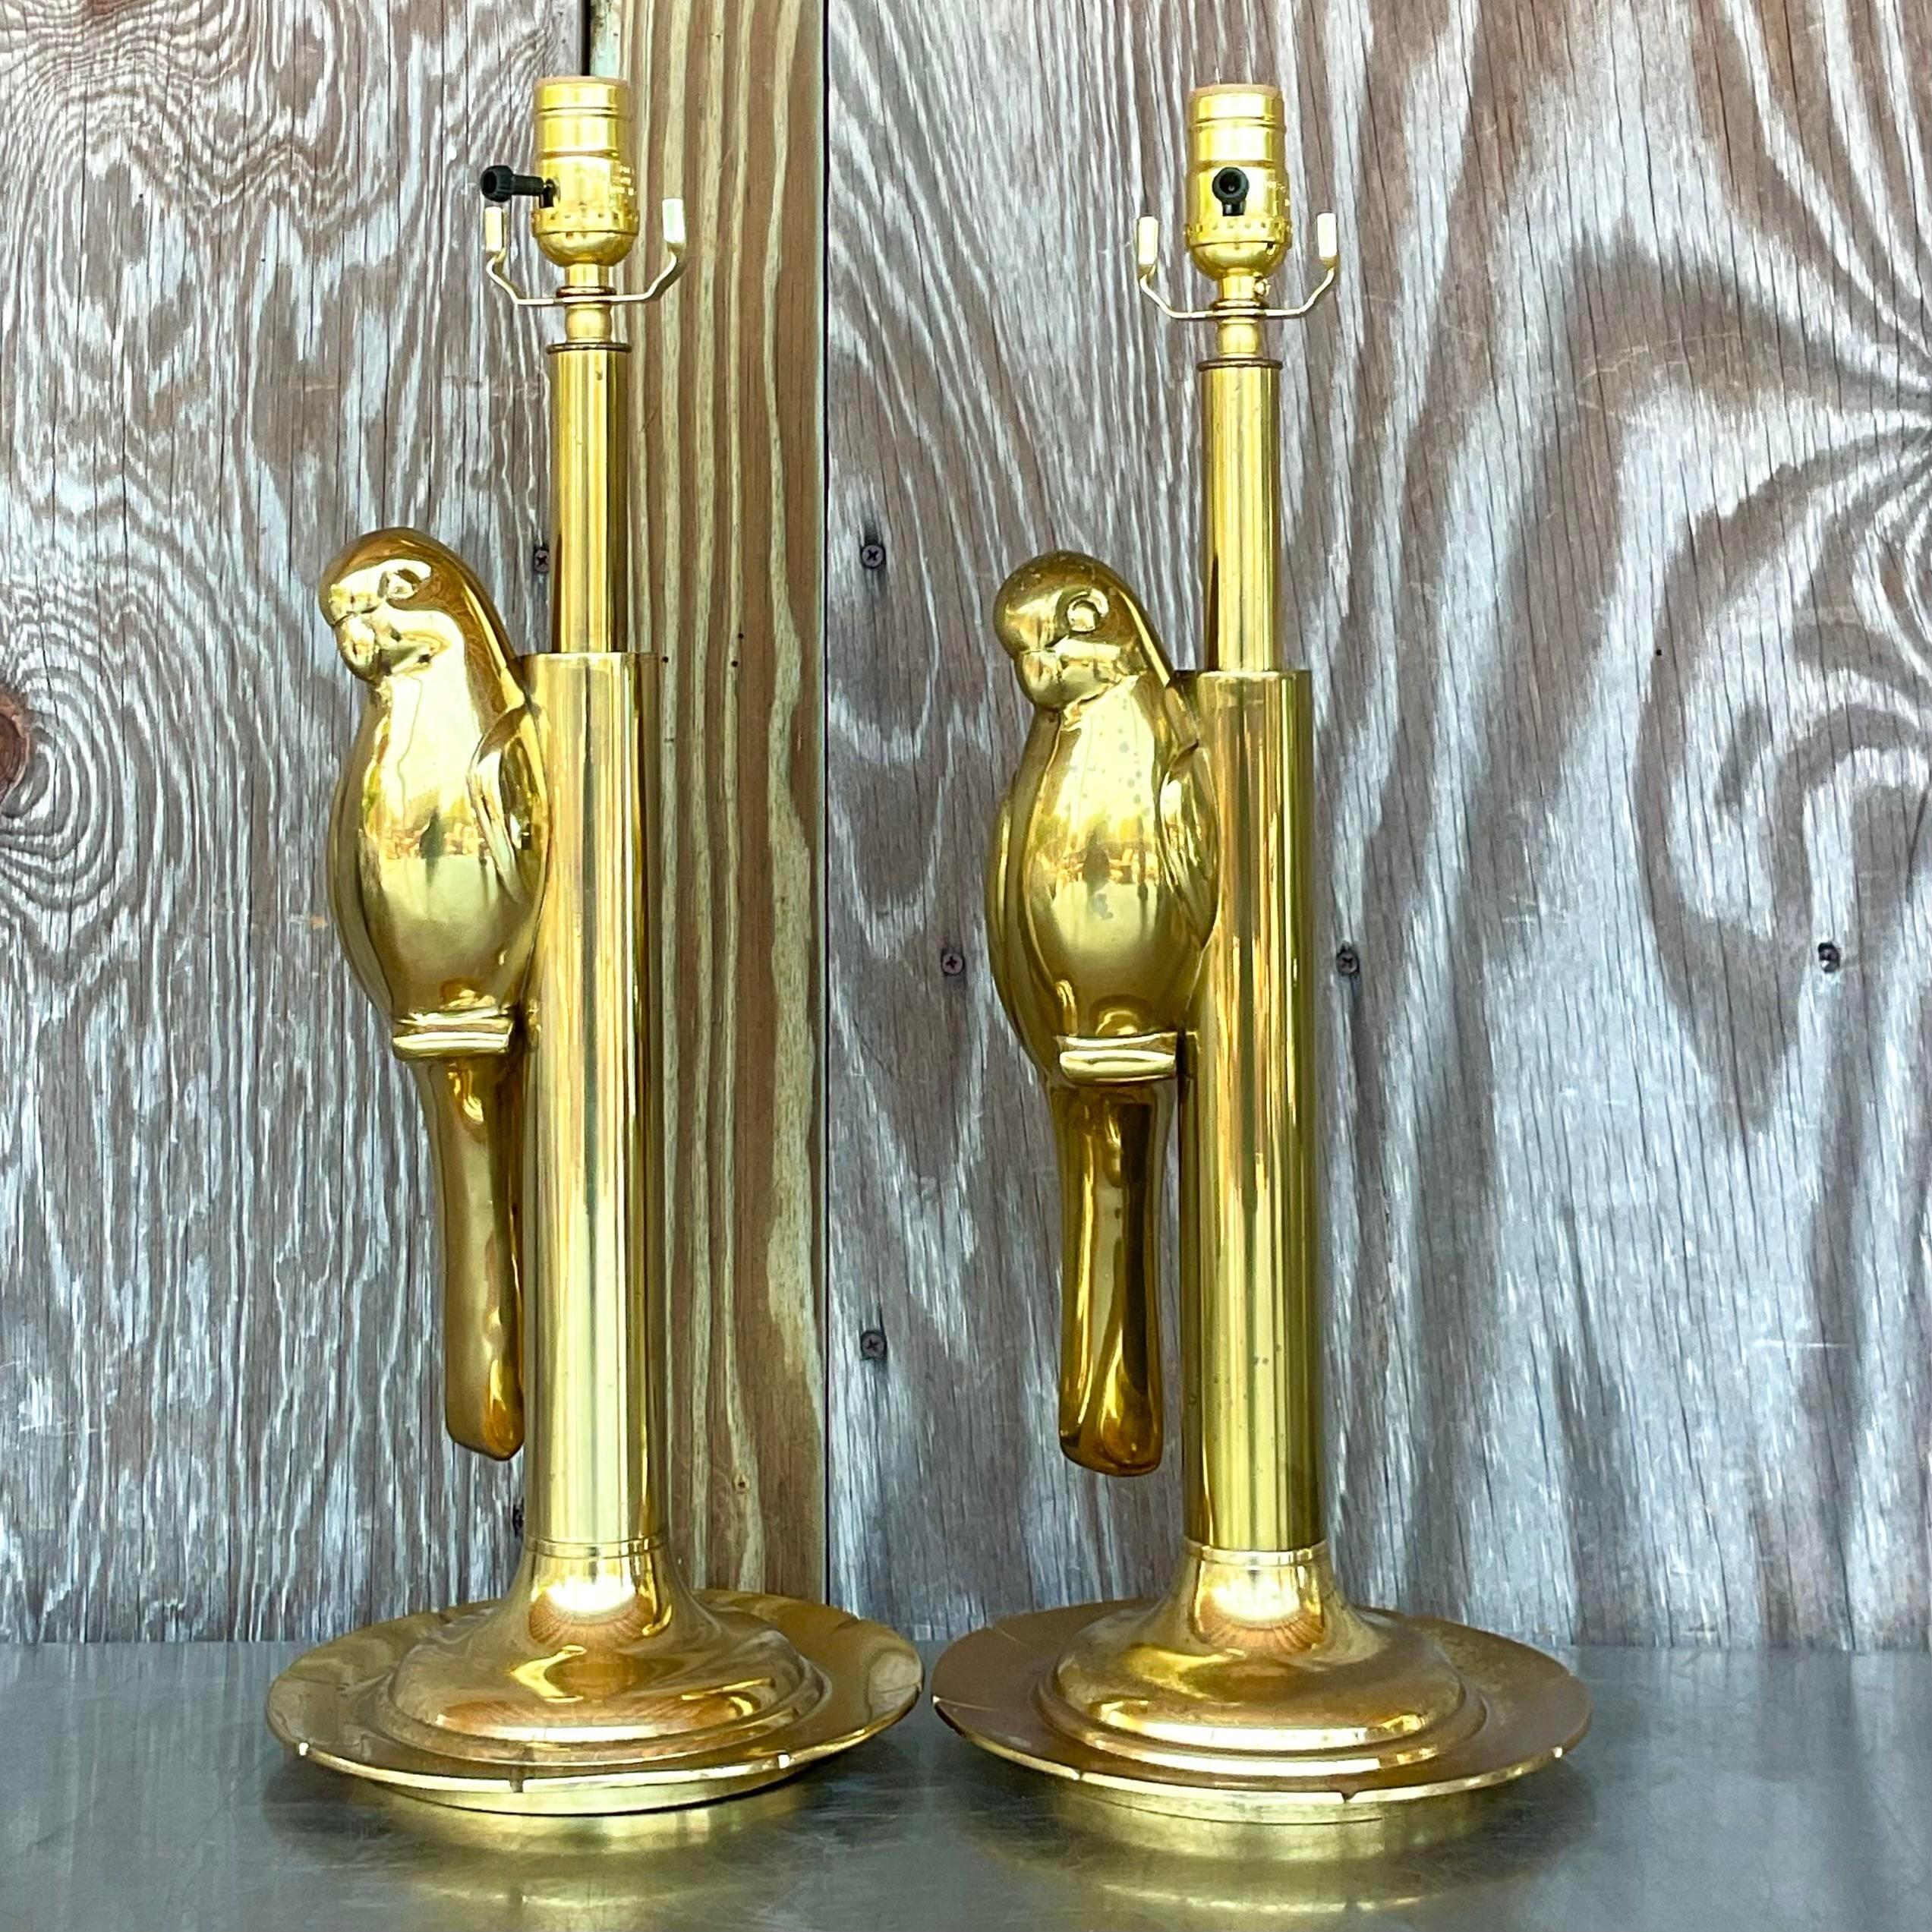 American Vintage Boho Polished Brass Parrot Lamps - a Pair For Sale